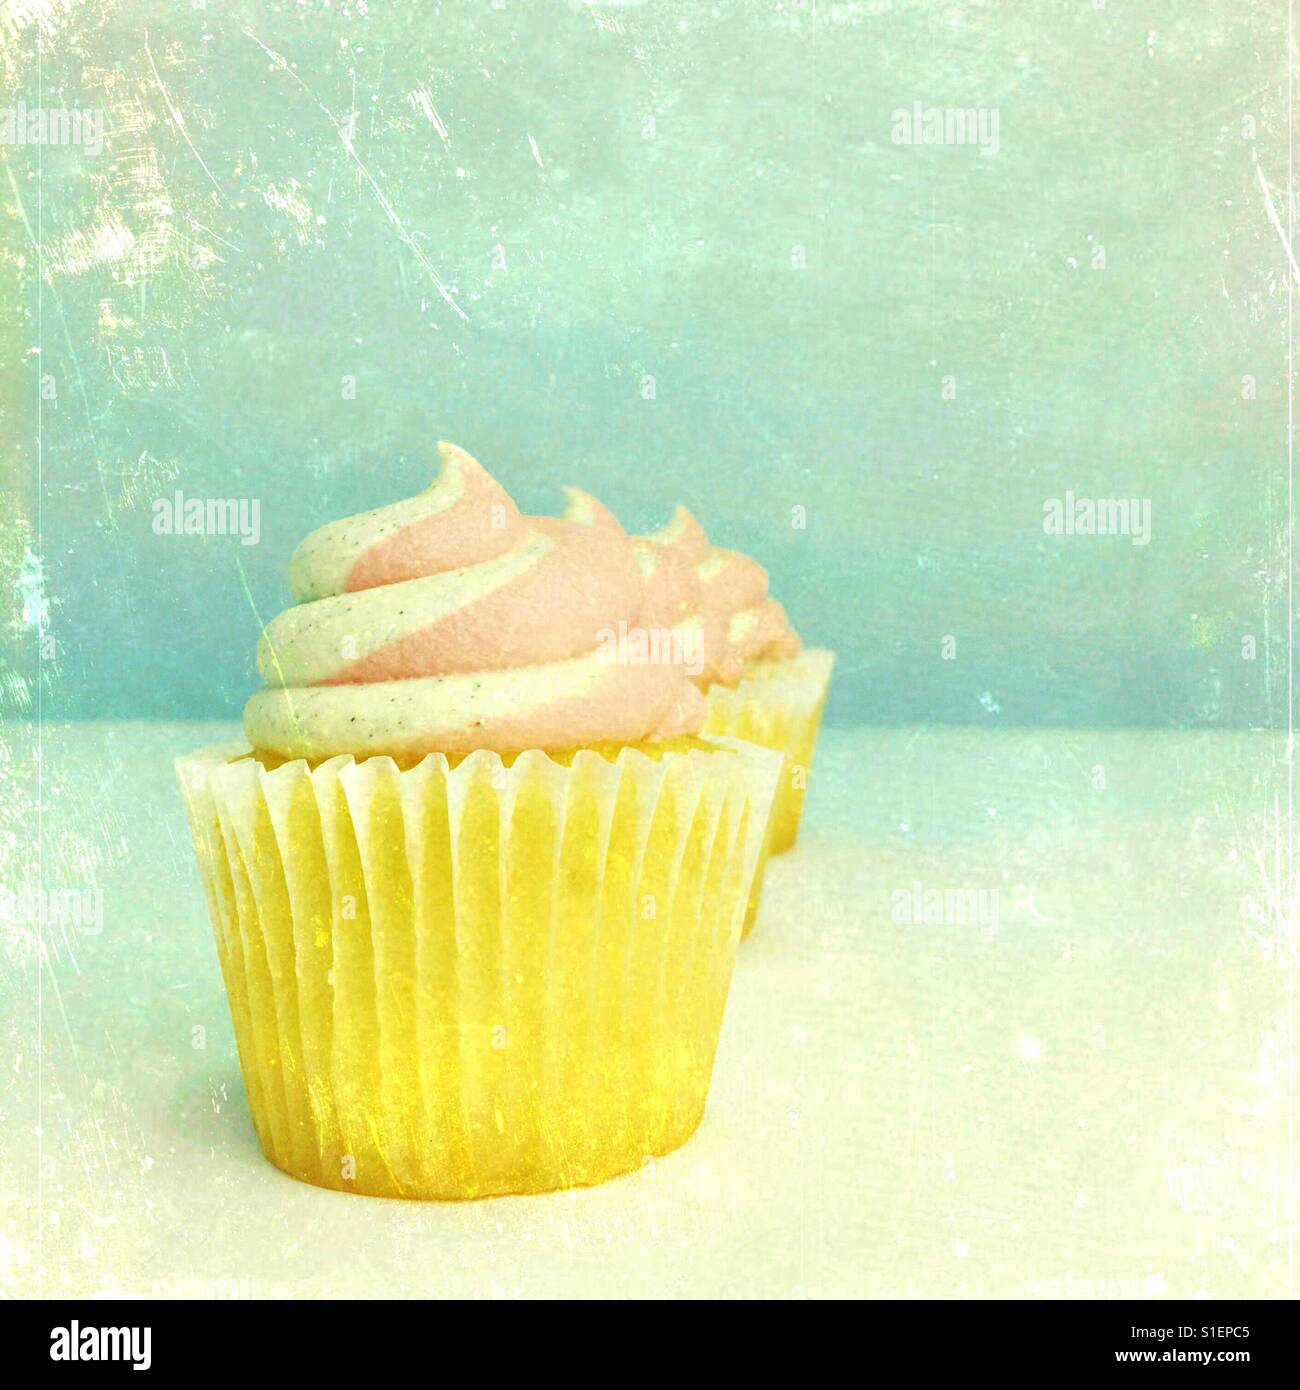 Cupcakes with swirled frosting. Square crop. Space for copy. Stock Photo